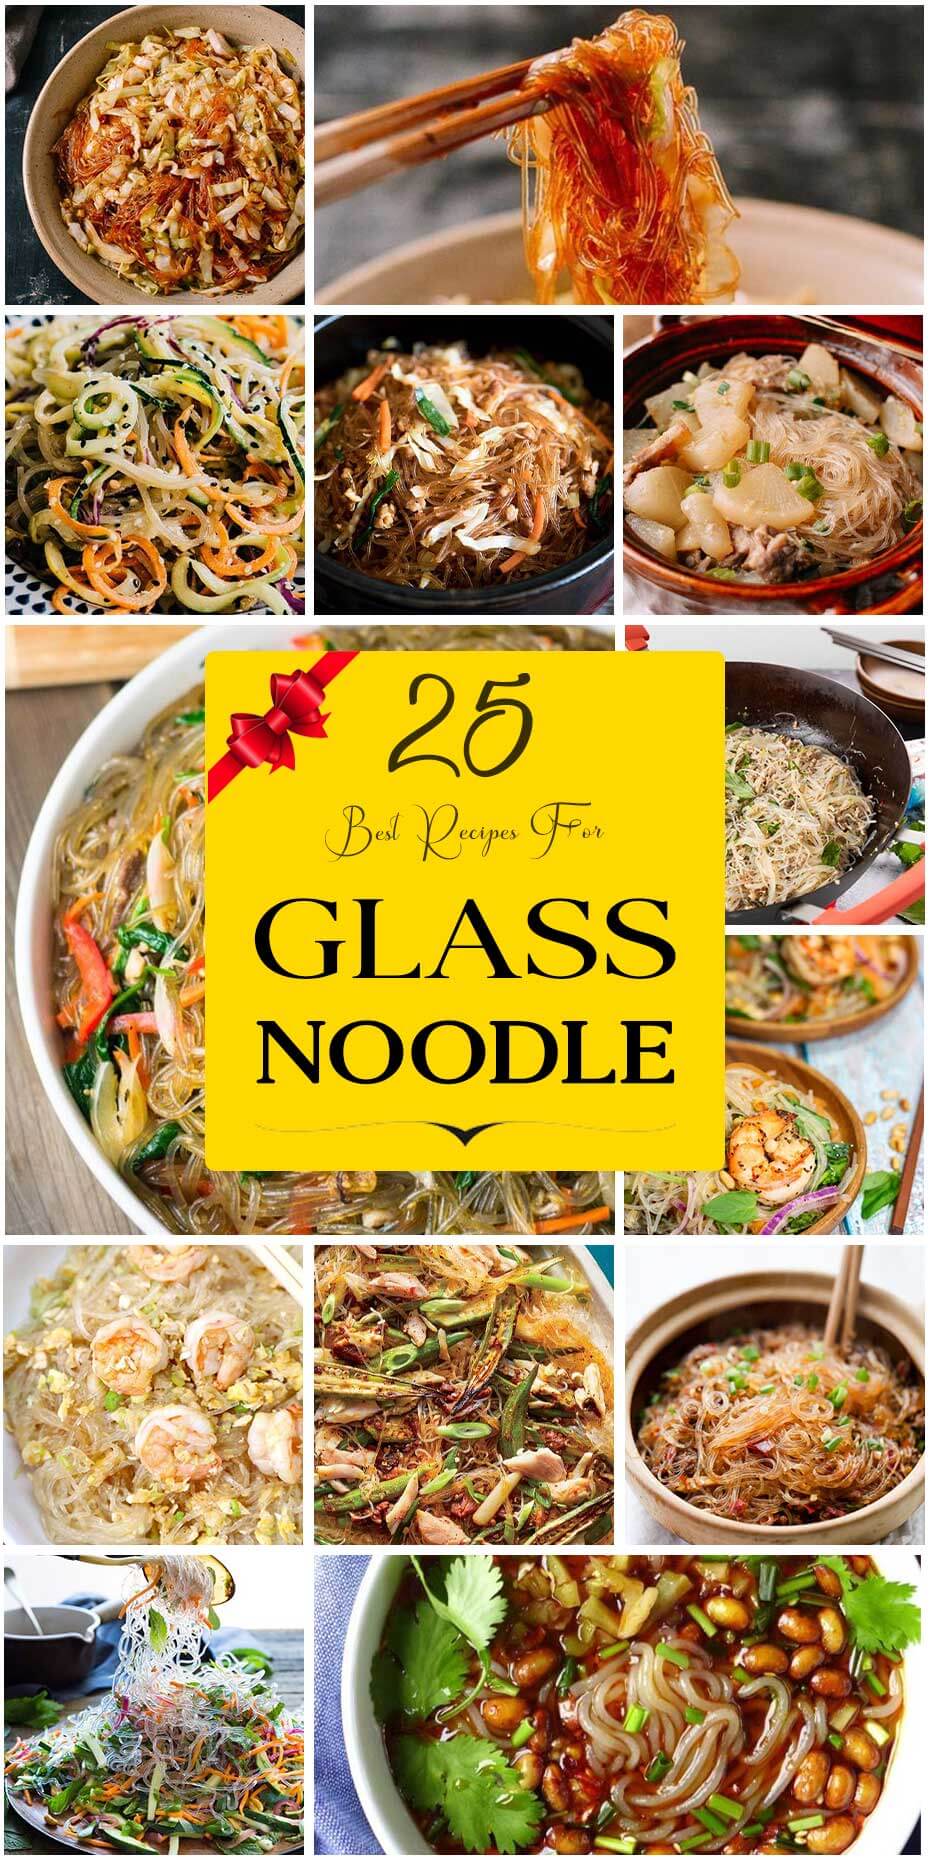 25 Amazing Ways To Cook Glass Noodles